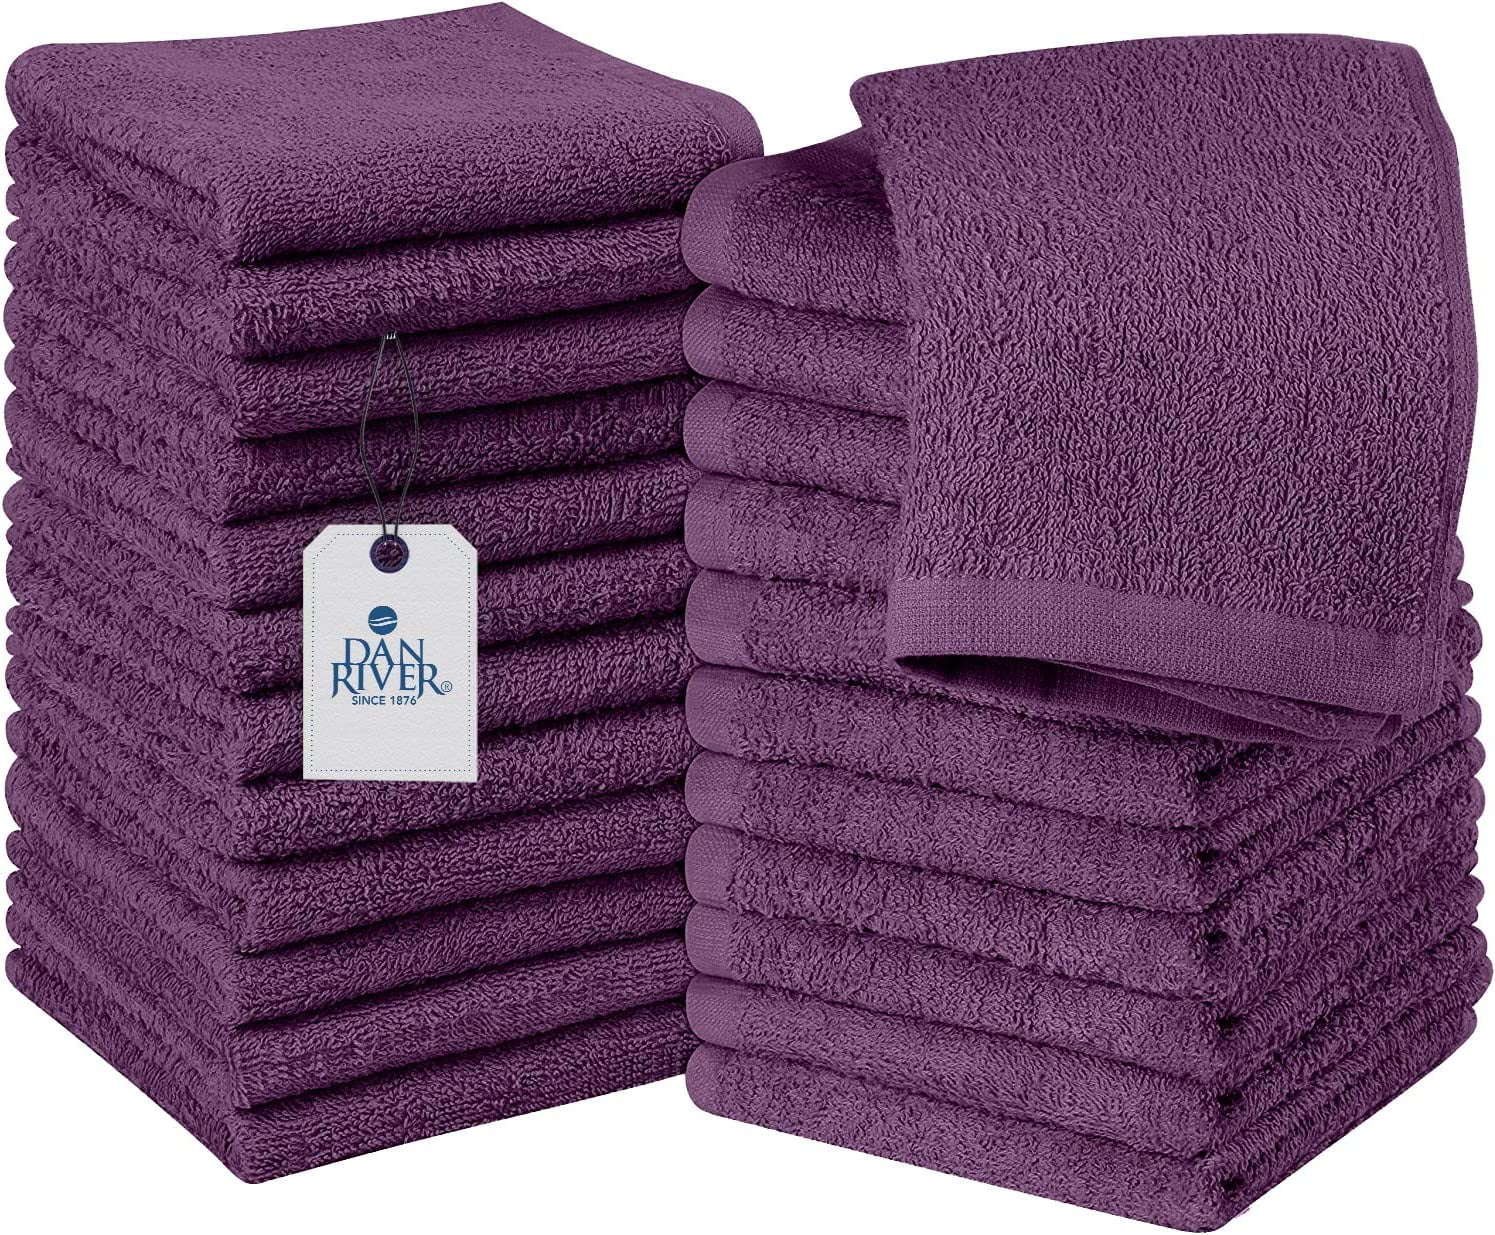 48-Pack: 100% Cotton Soft Absorbent Wash Rags Cleaning Dish Cloths